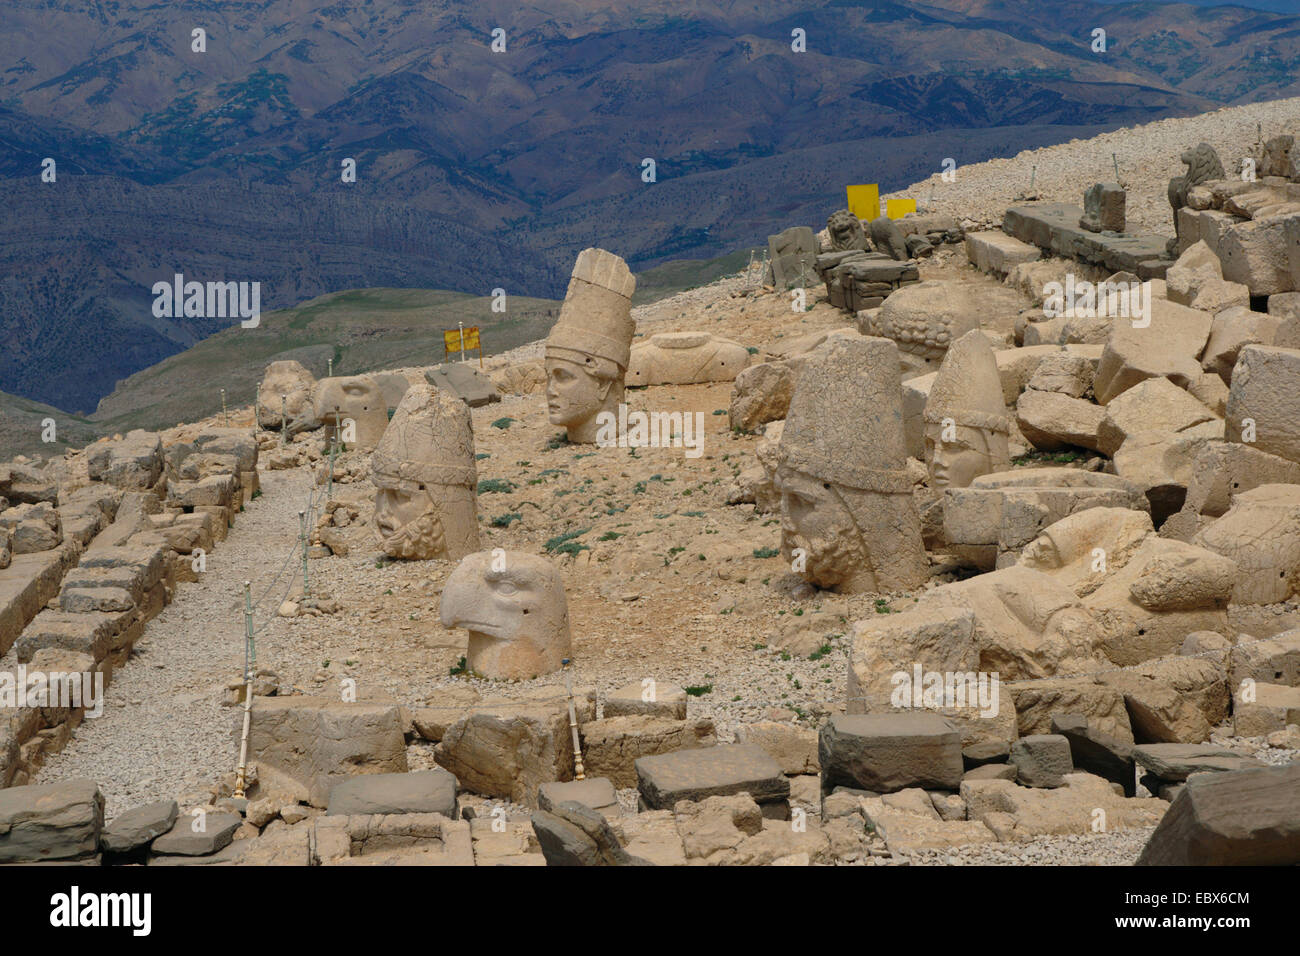 free-standing heads of over-size statues of kings and deities at the ancient sanctum and tomb at Mount Nemrut, Turkey, Anatolia, Taurusgebirge Stock Photo